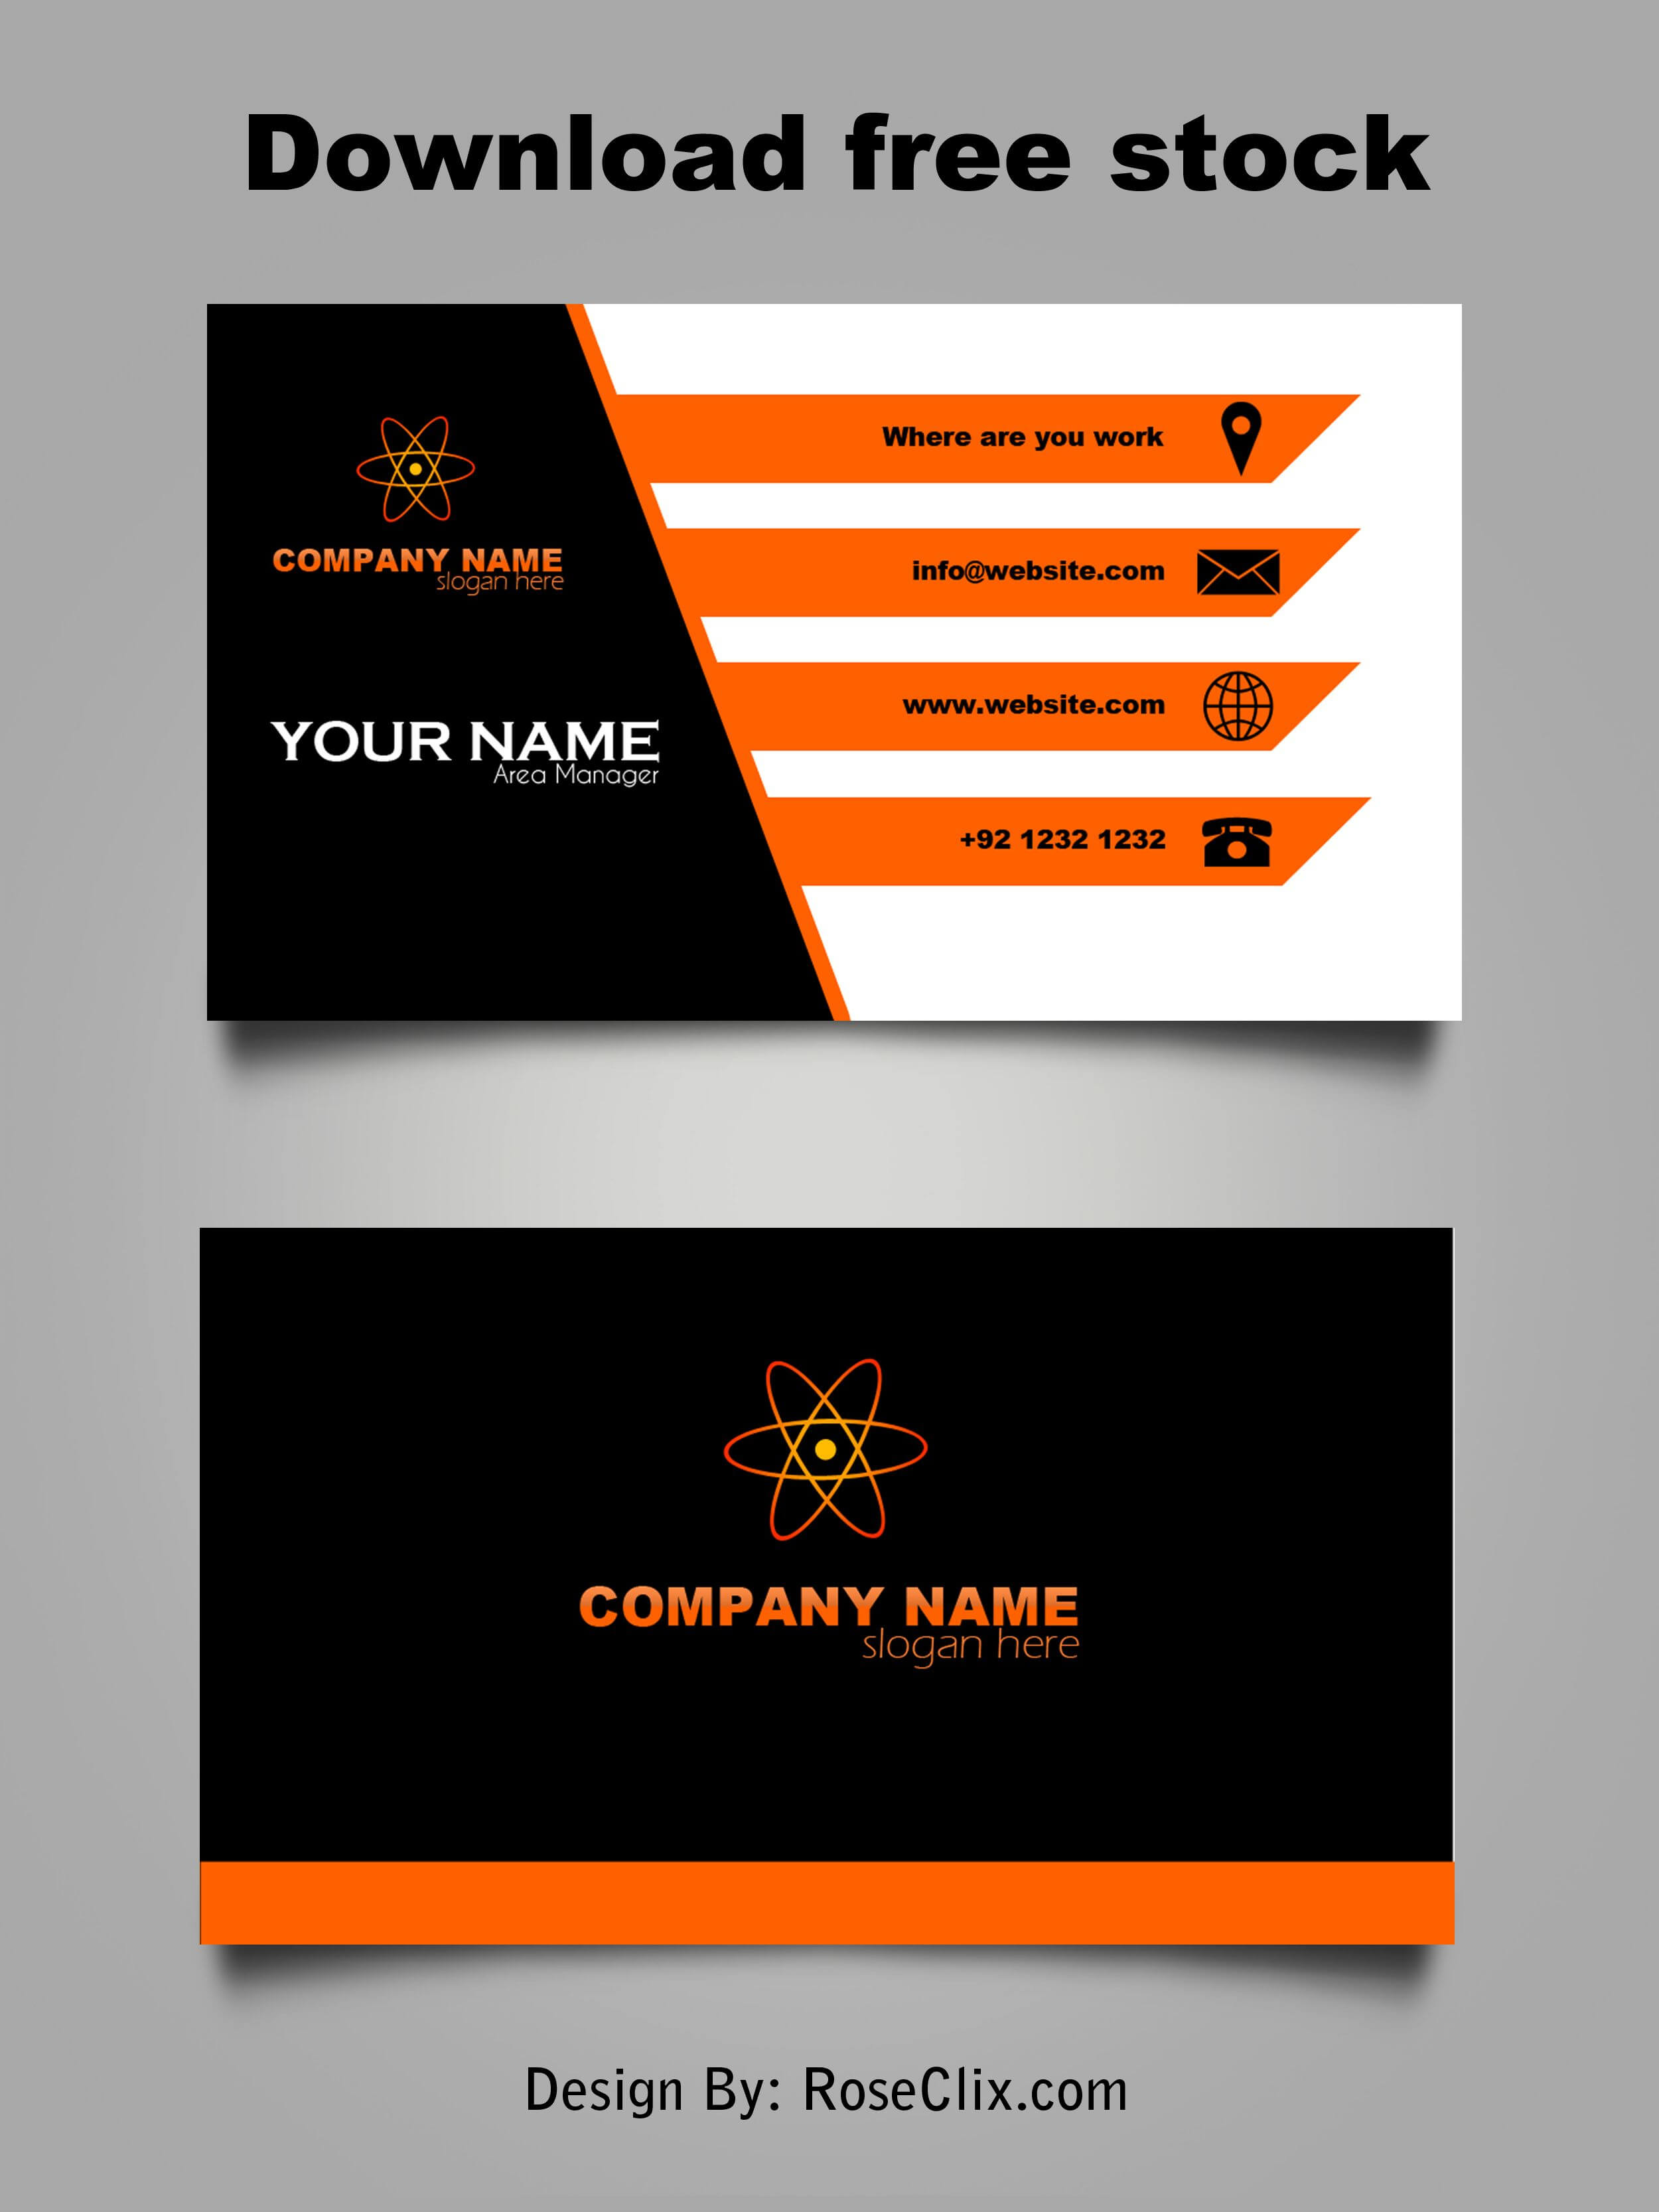 Business Card Template Free Downloads Psd Fils. | Business Throughout Templates For Visiting Cards Free Downloads